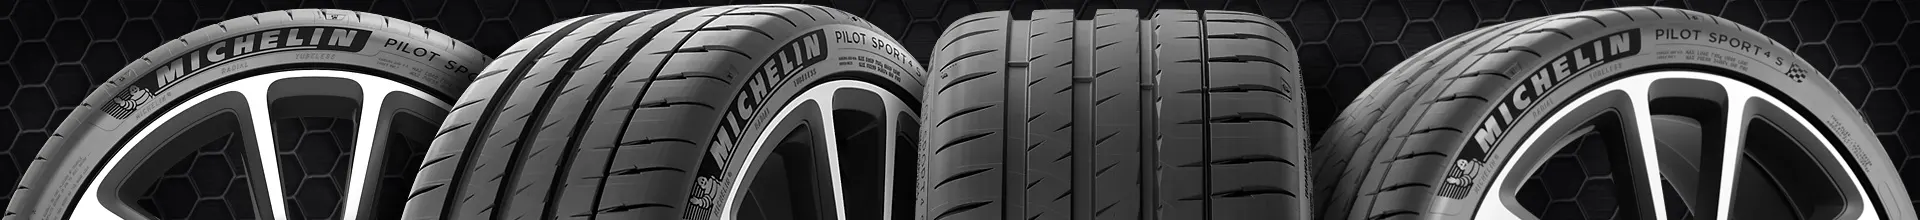 195 55 15 discount tires from Online Wheels Direct